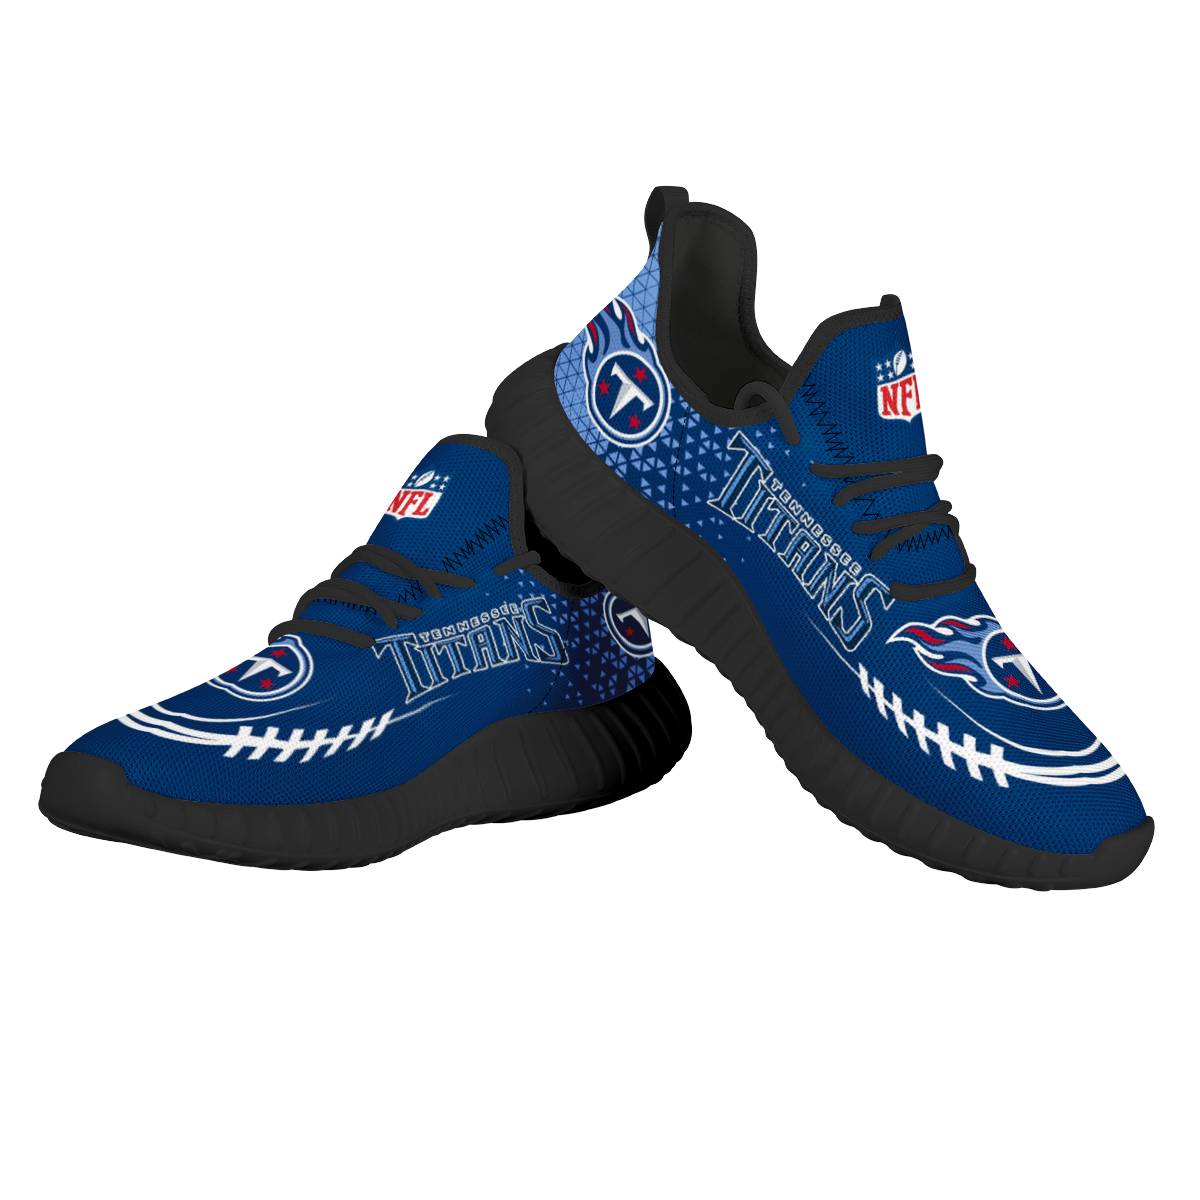 Men's NFL Tennessee Titans Mesh Knit Sneakers/Shoes 001